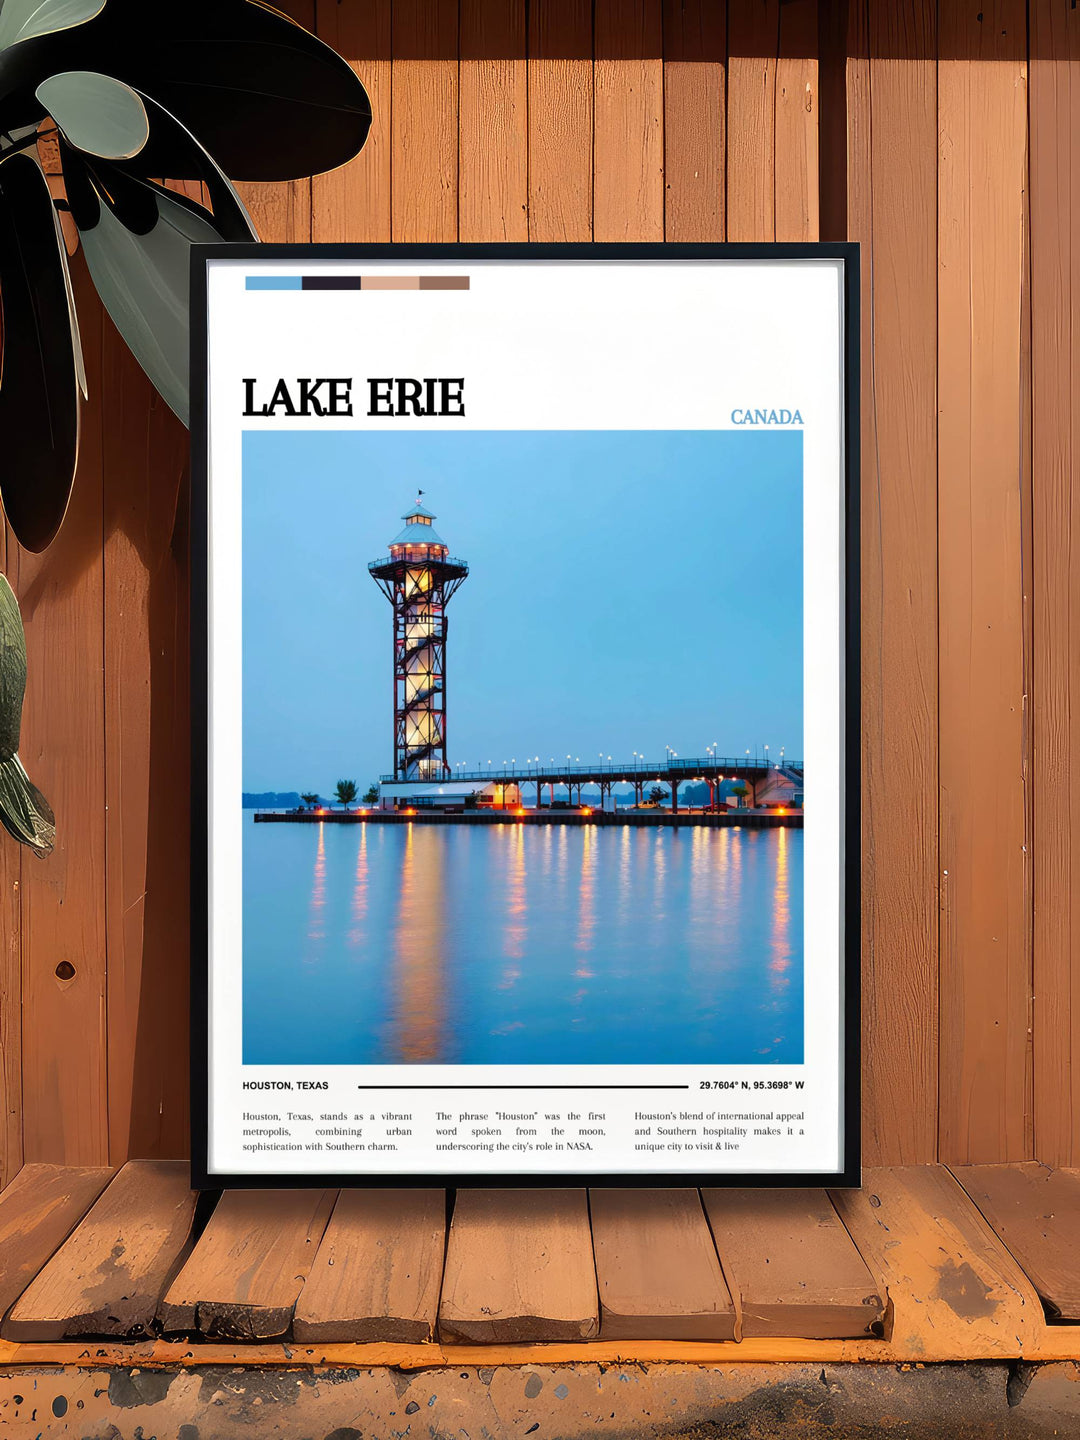 Personalized gift featuring a custom print of Lake Erie, perfect for anniversary or birthday gifts celebrating the lake.